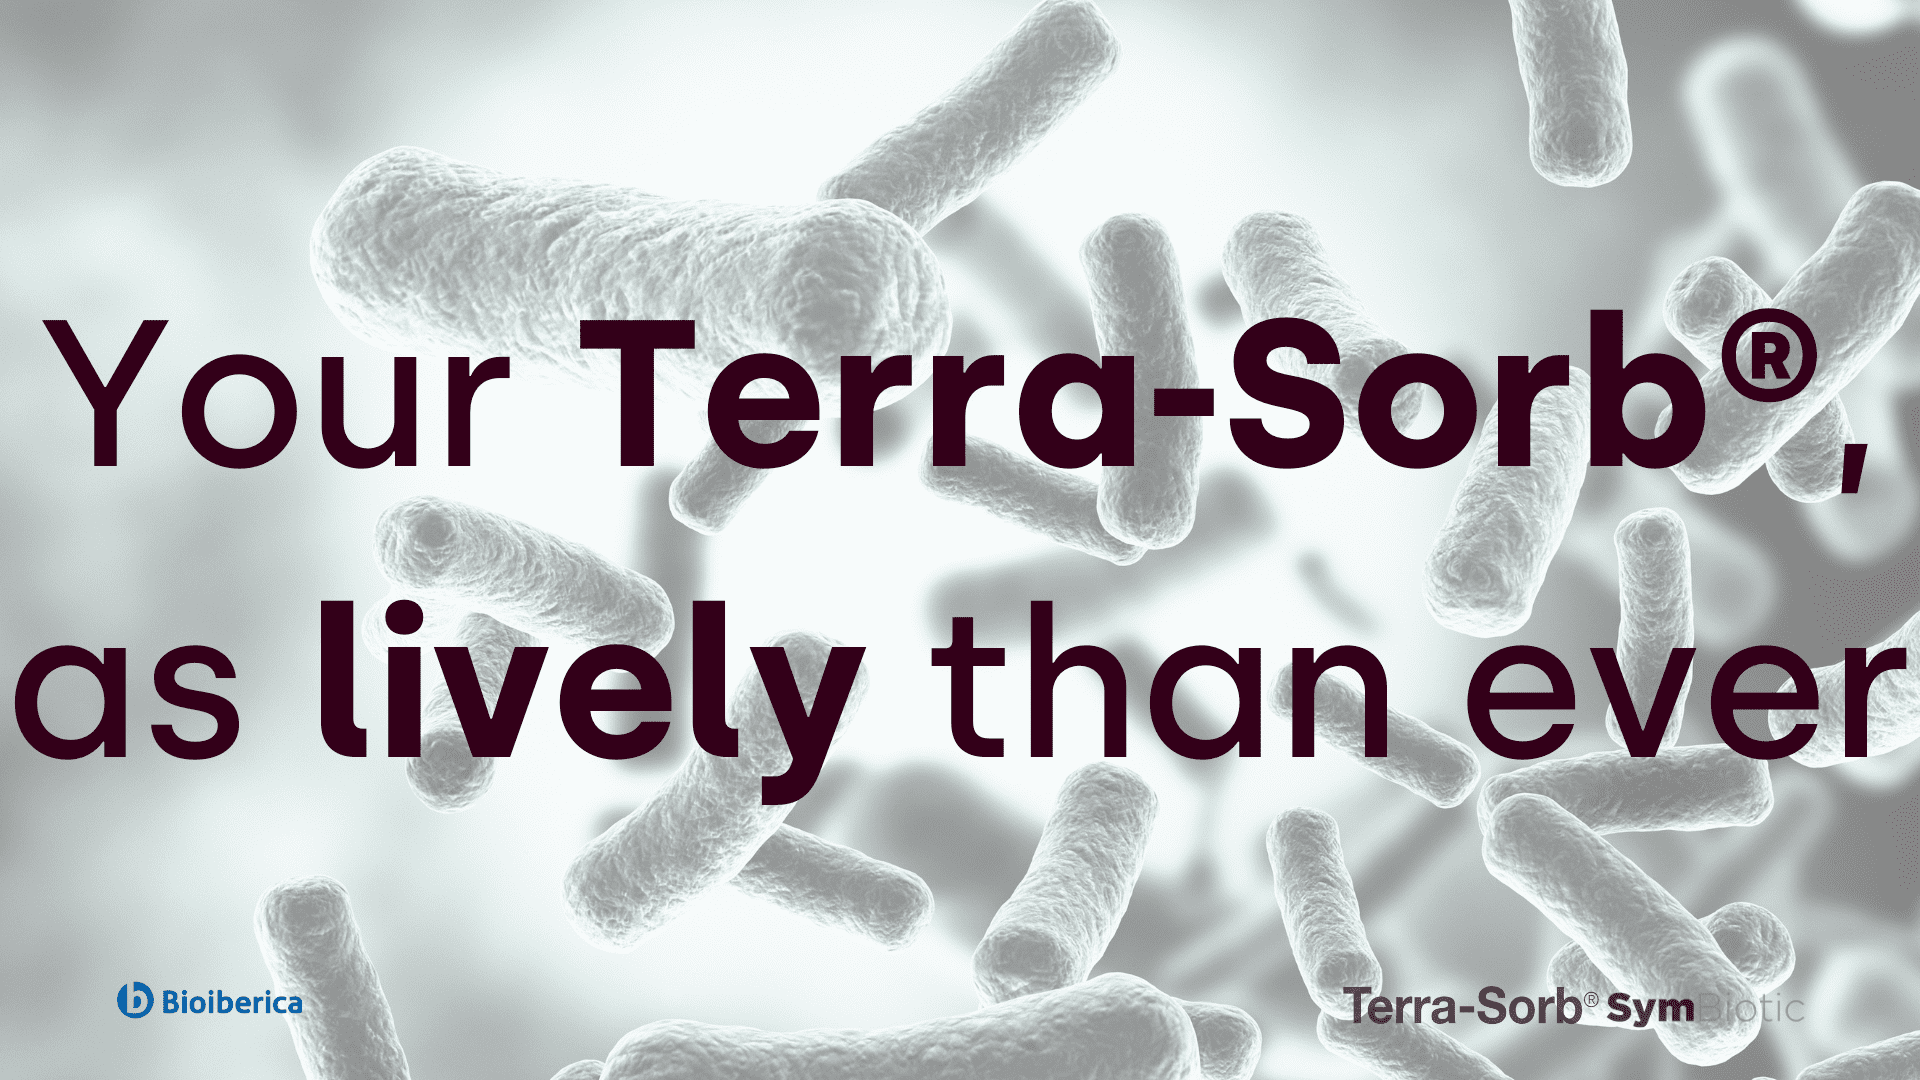 Your Terra Sorb as lively as ever